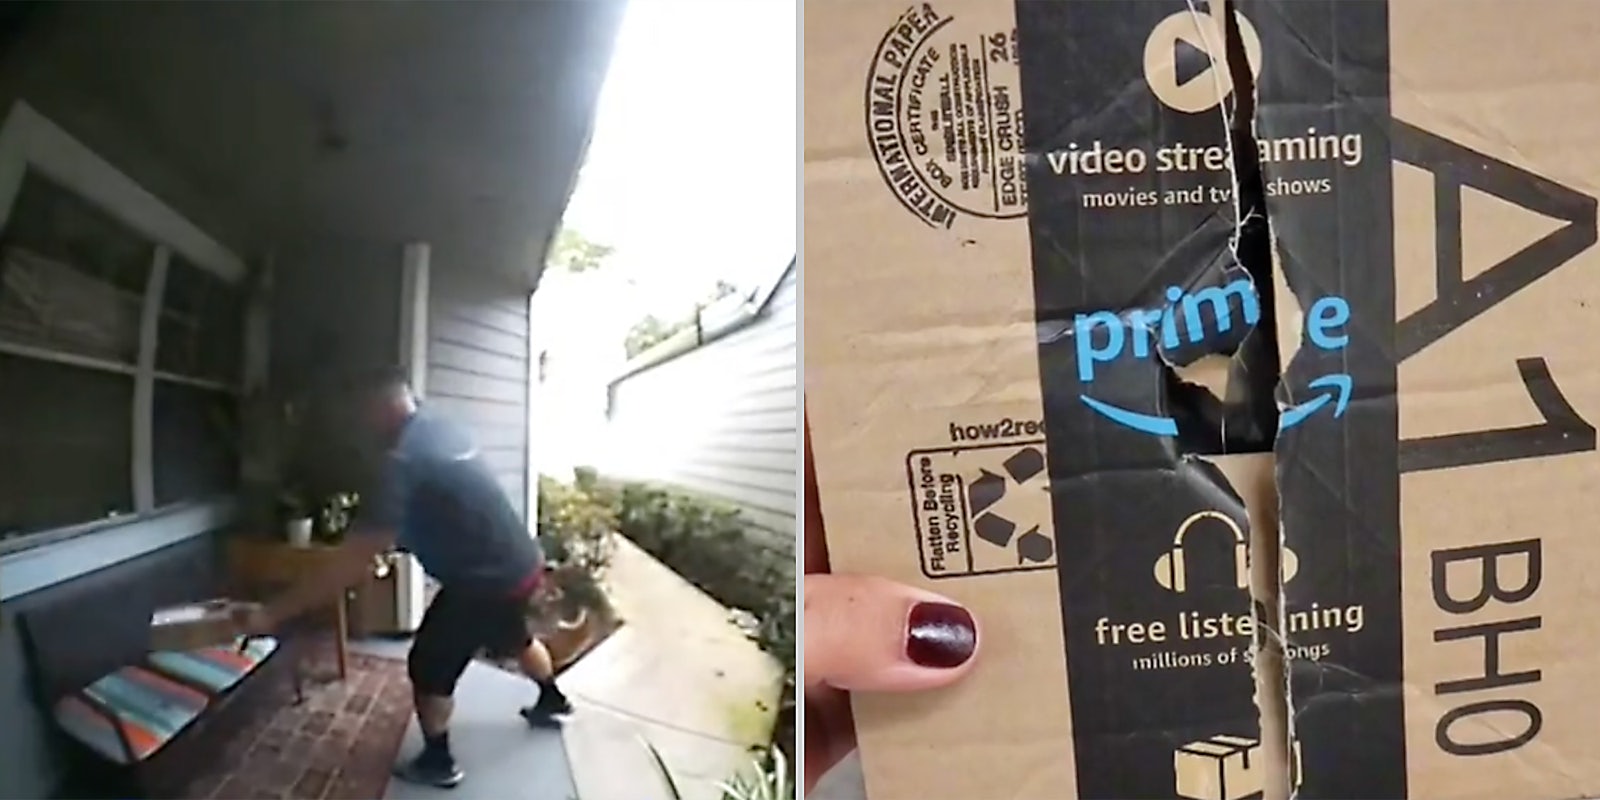 A package being delivered.